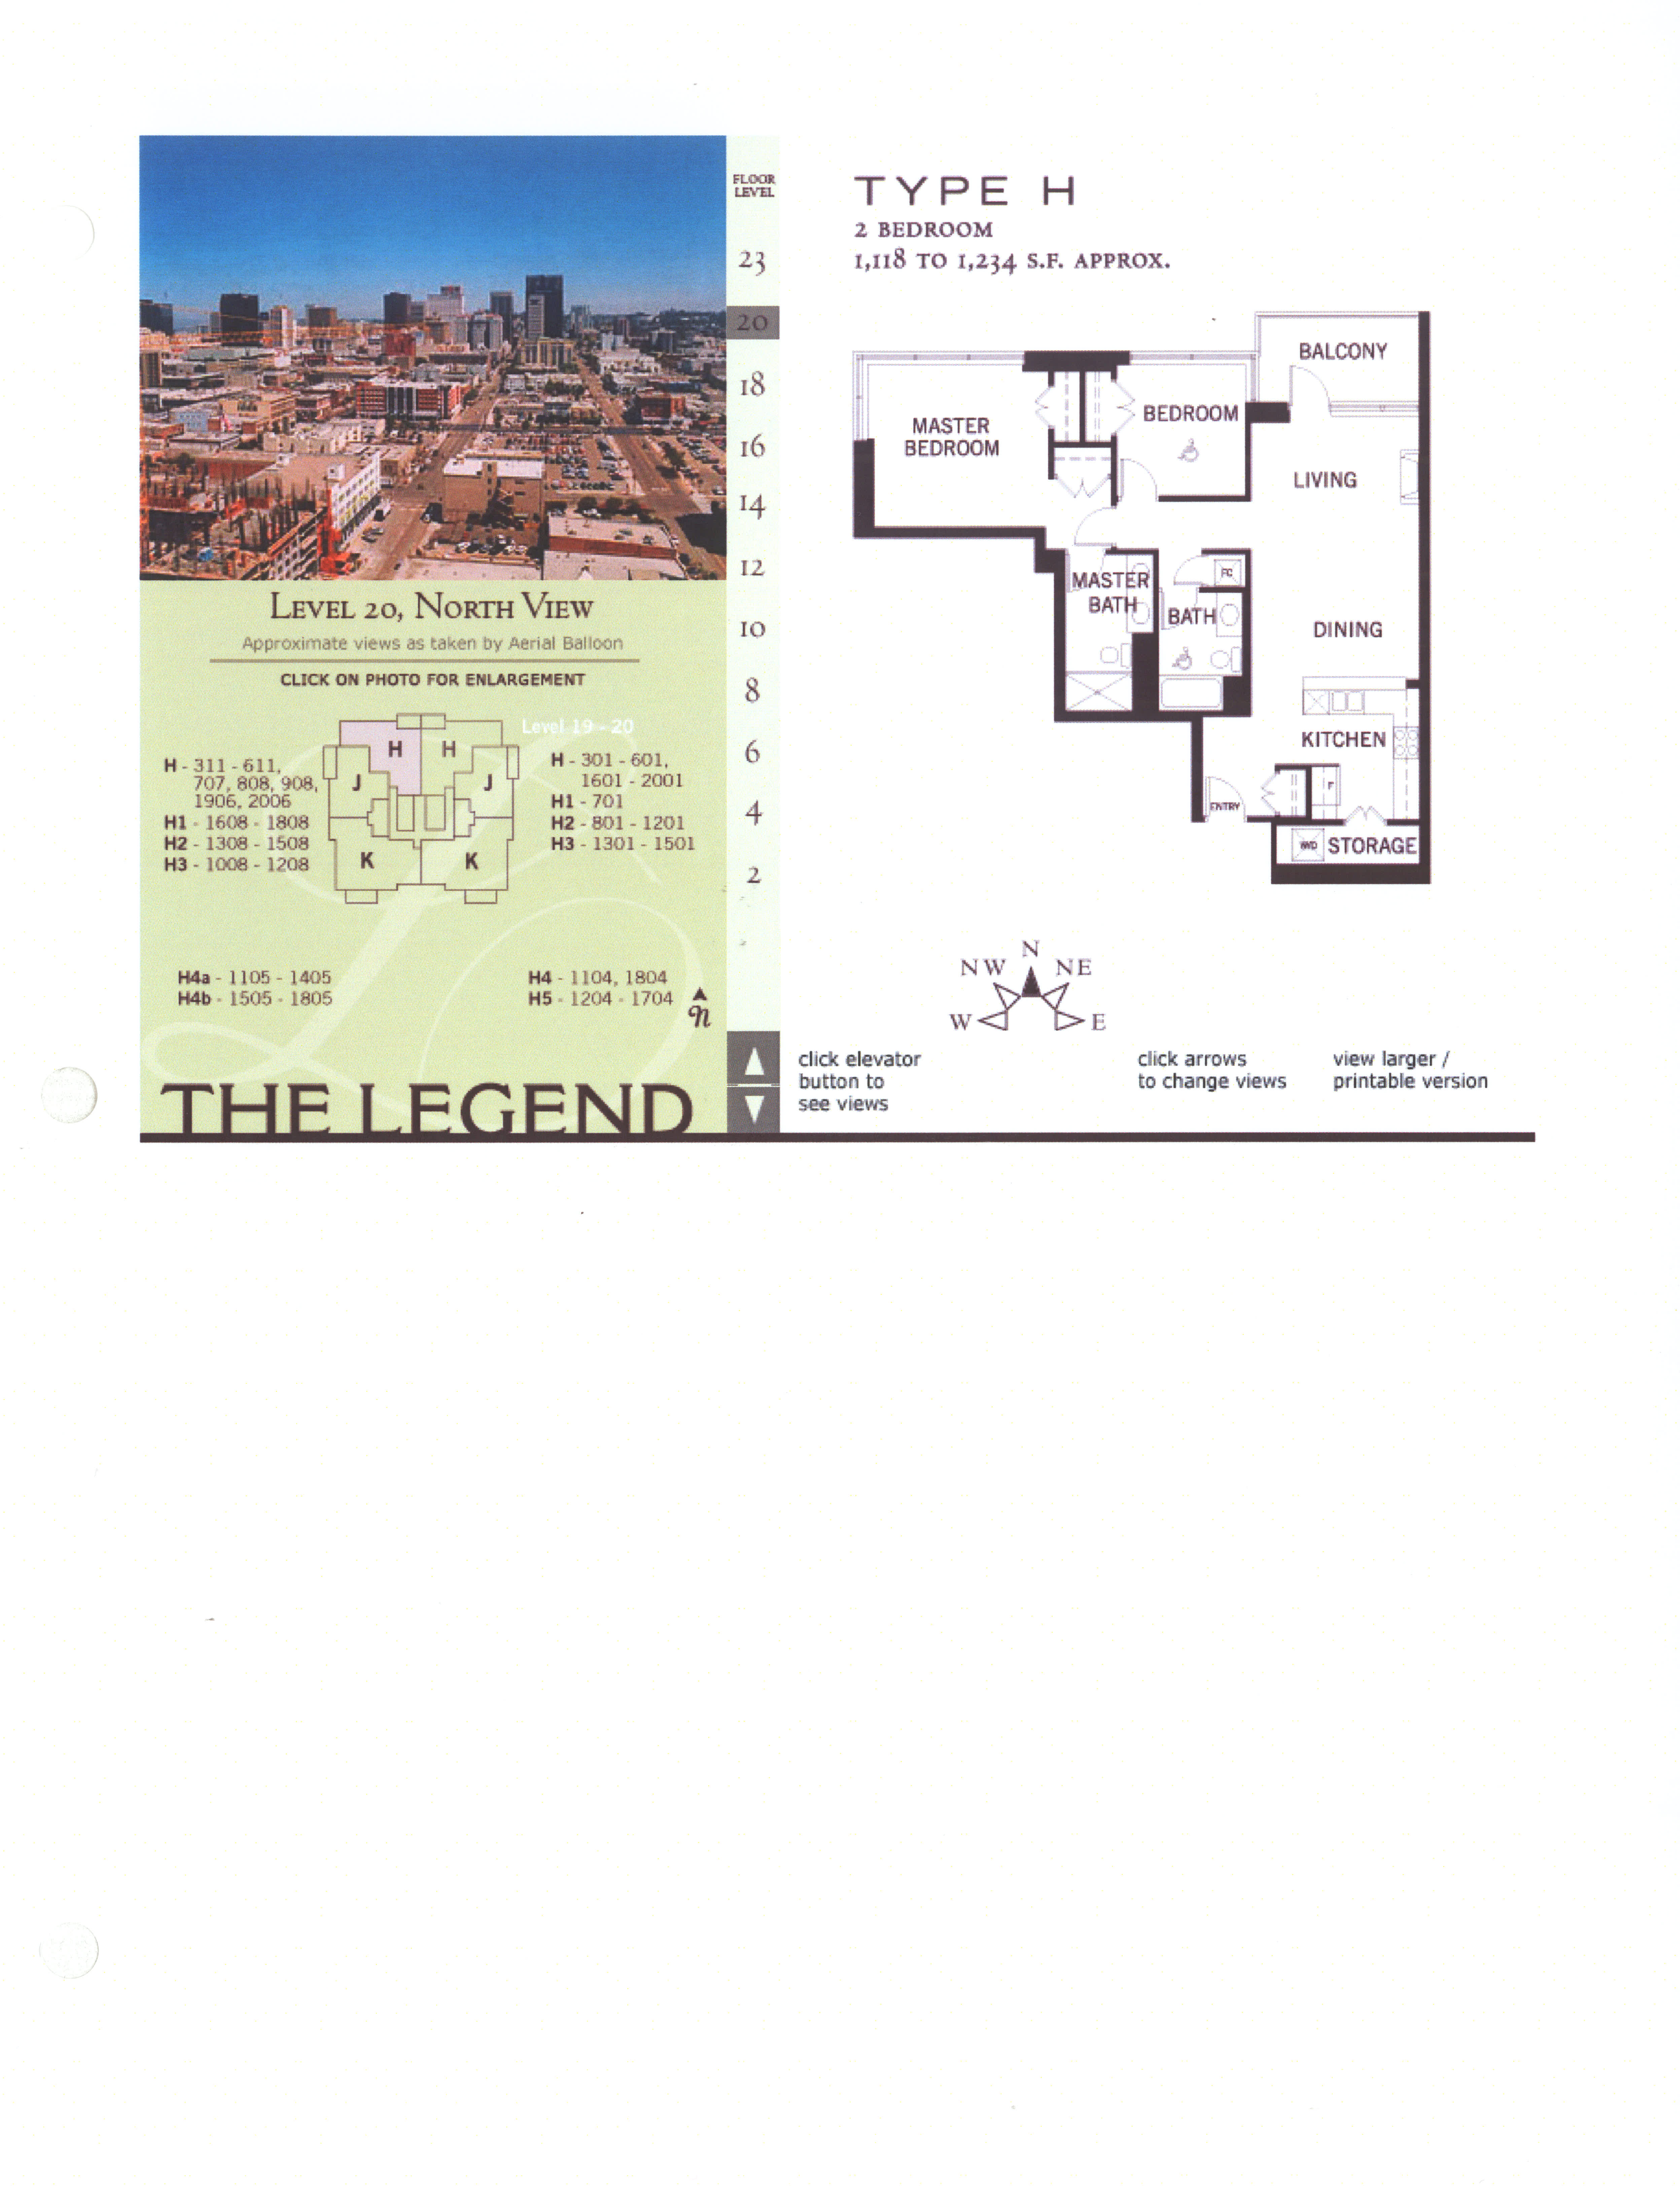 The Legend Floor Plan Level 12, North View – Type H